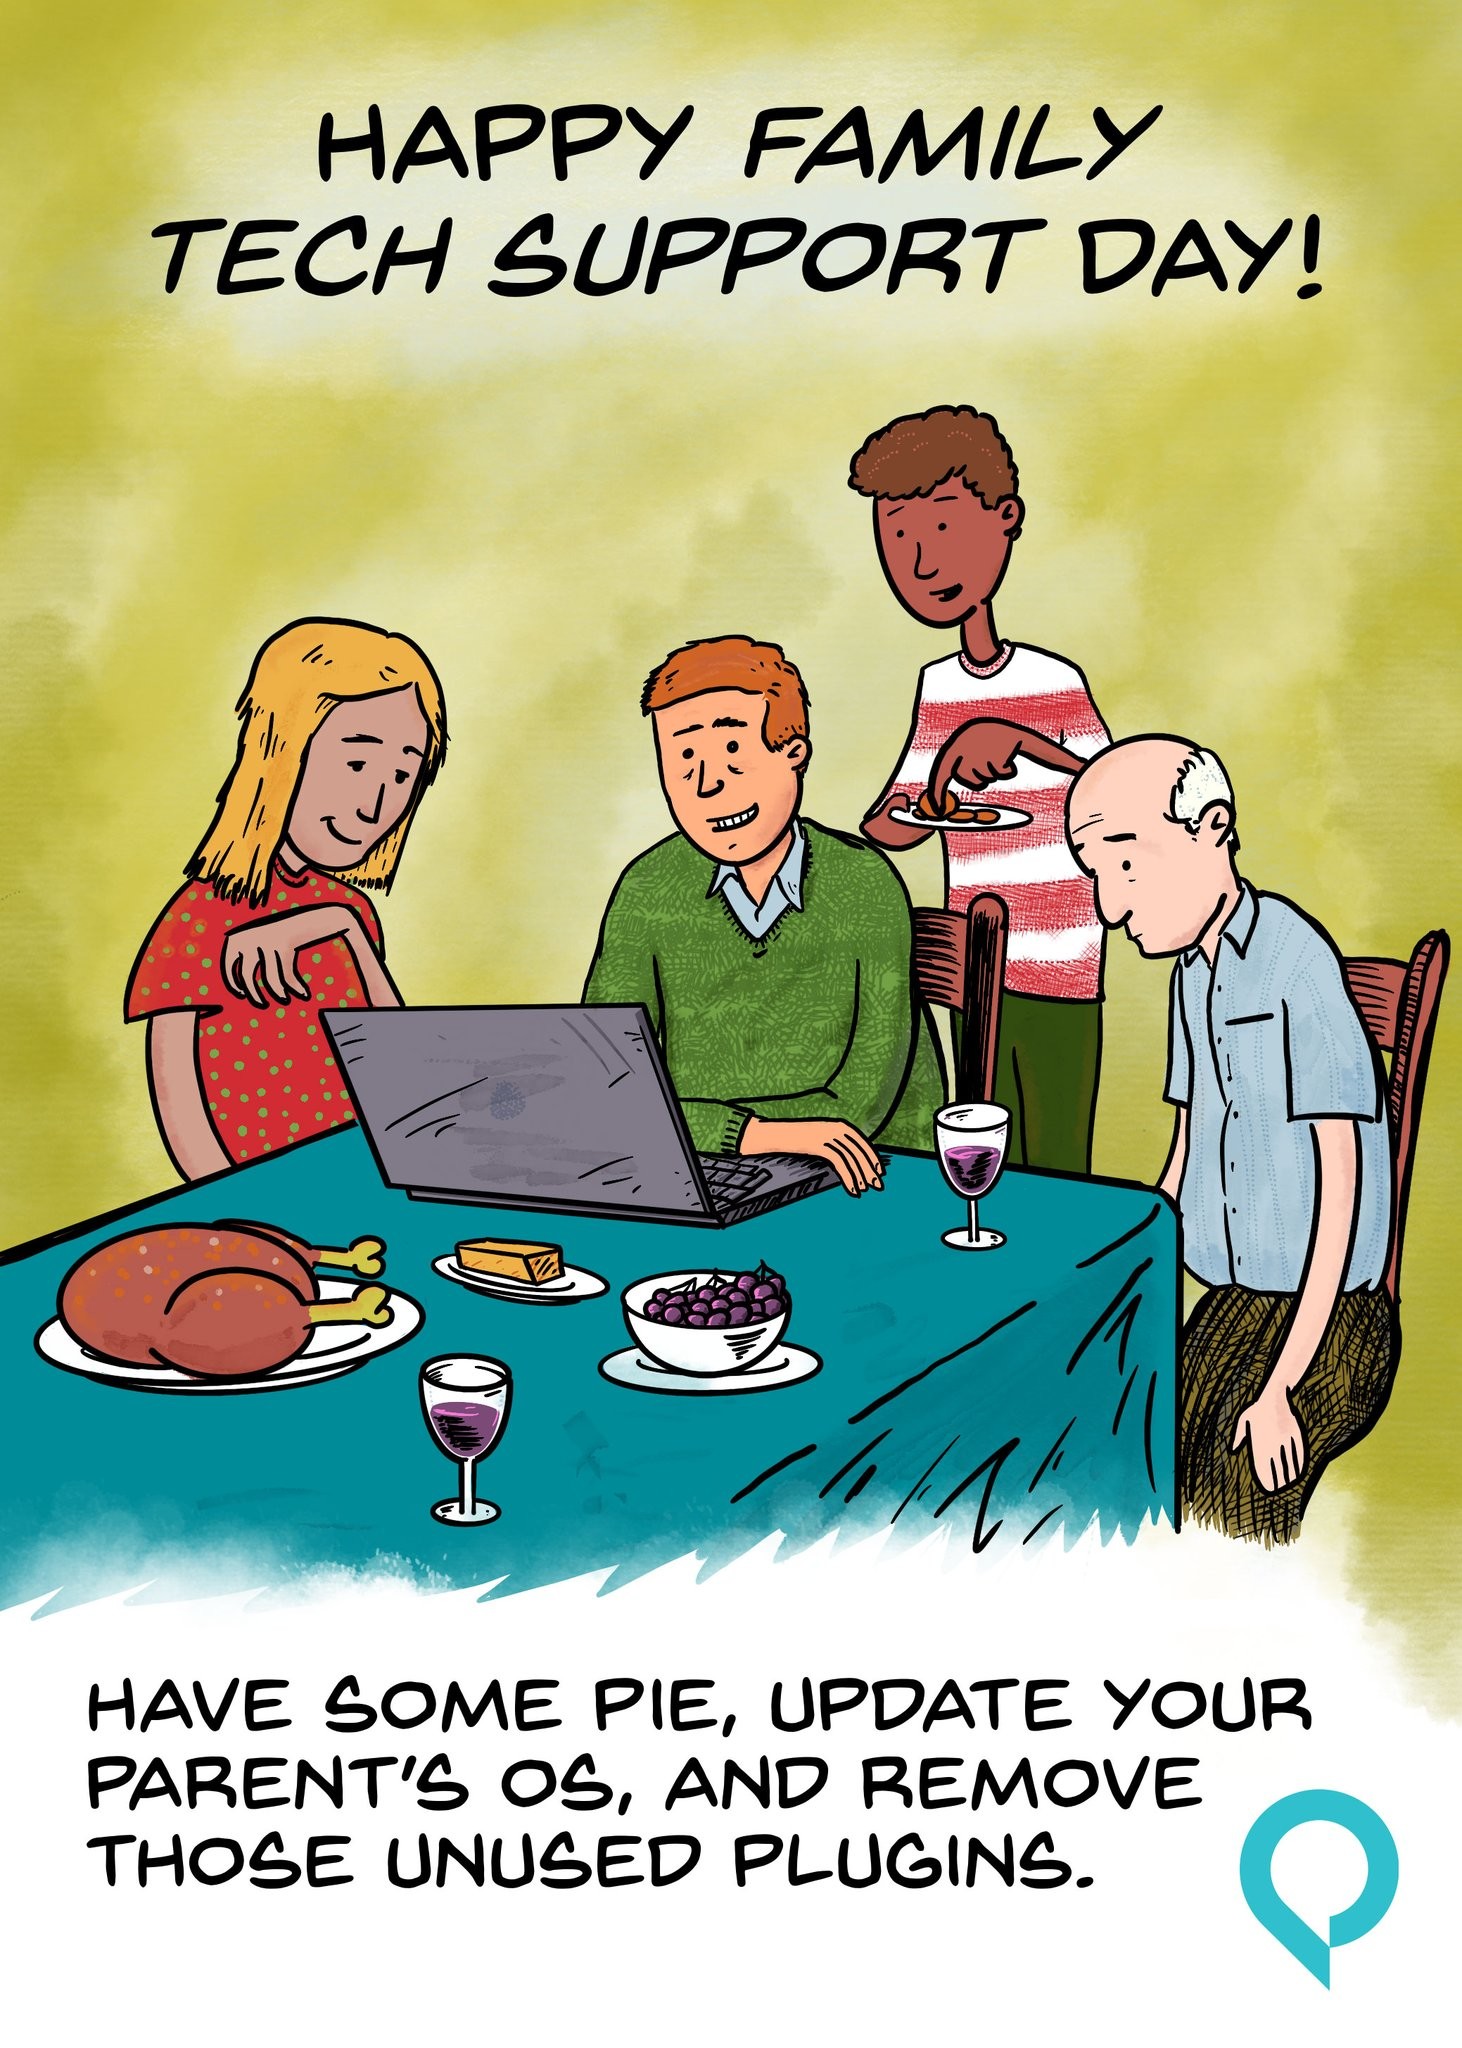 A cartoon drawing of four people gathered around a laptop on the edge of a table. Also on the table are glasses of wine, butter, turkey, and other holiday food. The text on the drawing says "Happy Family tech Support Day! Have some pie, update your <br />parent's OS, and remove those unused plugins."